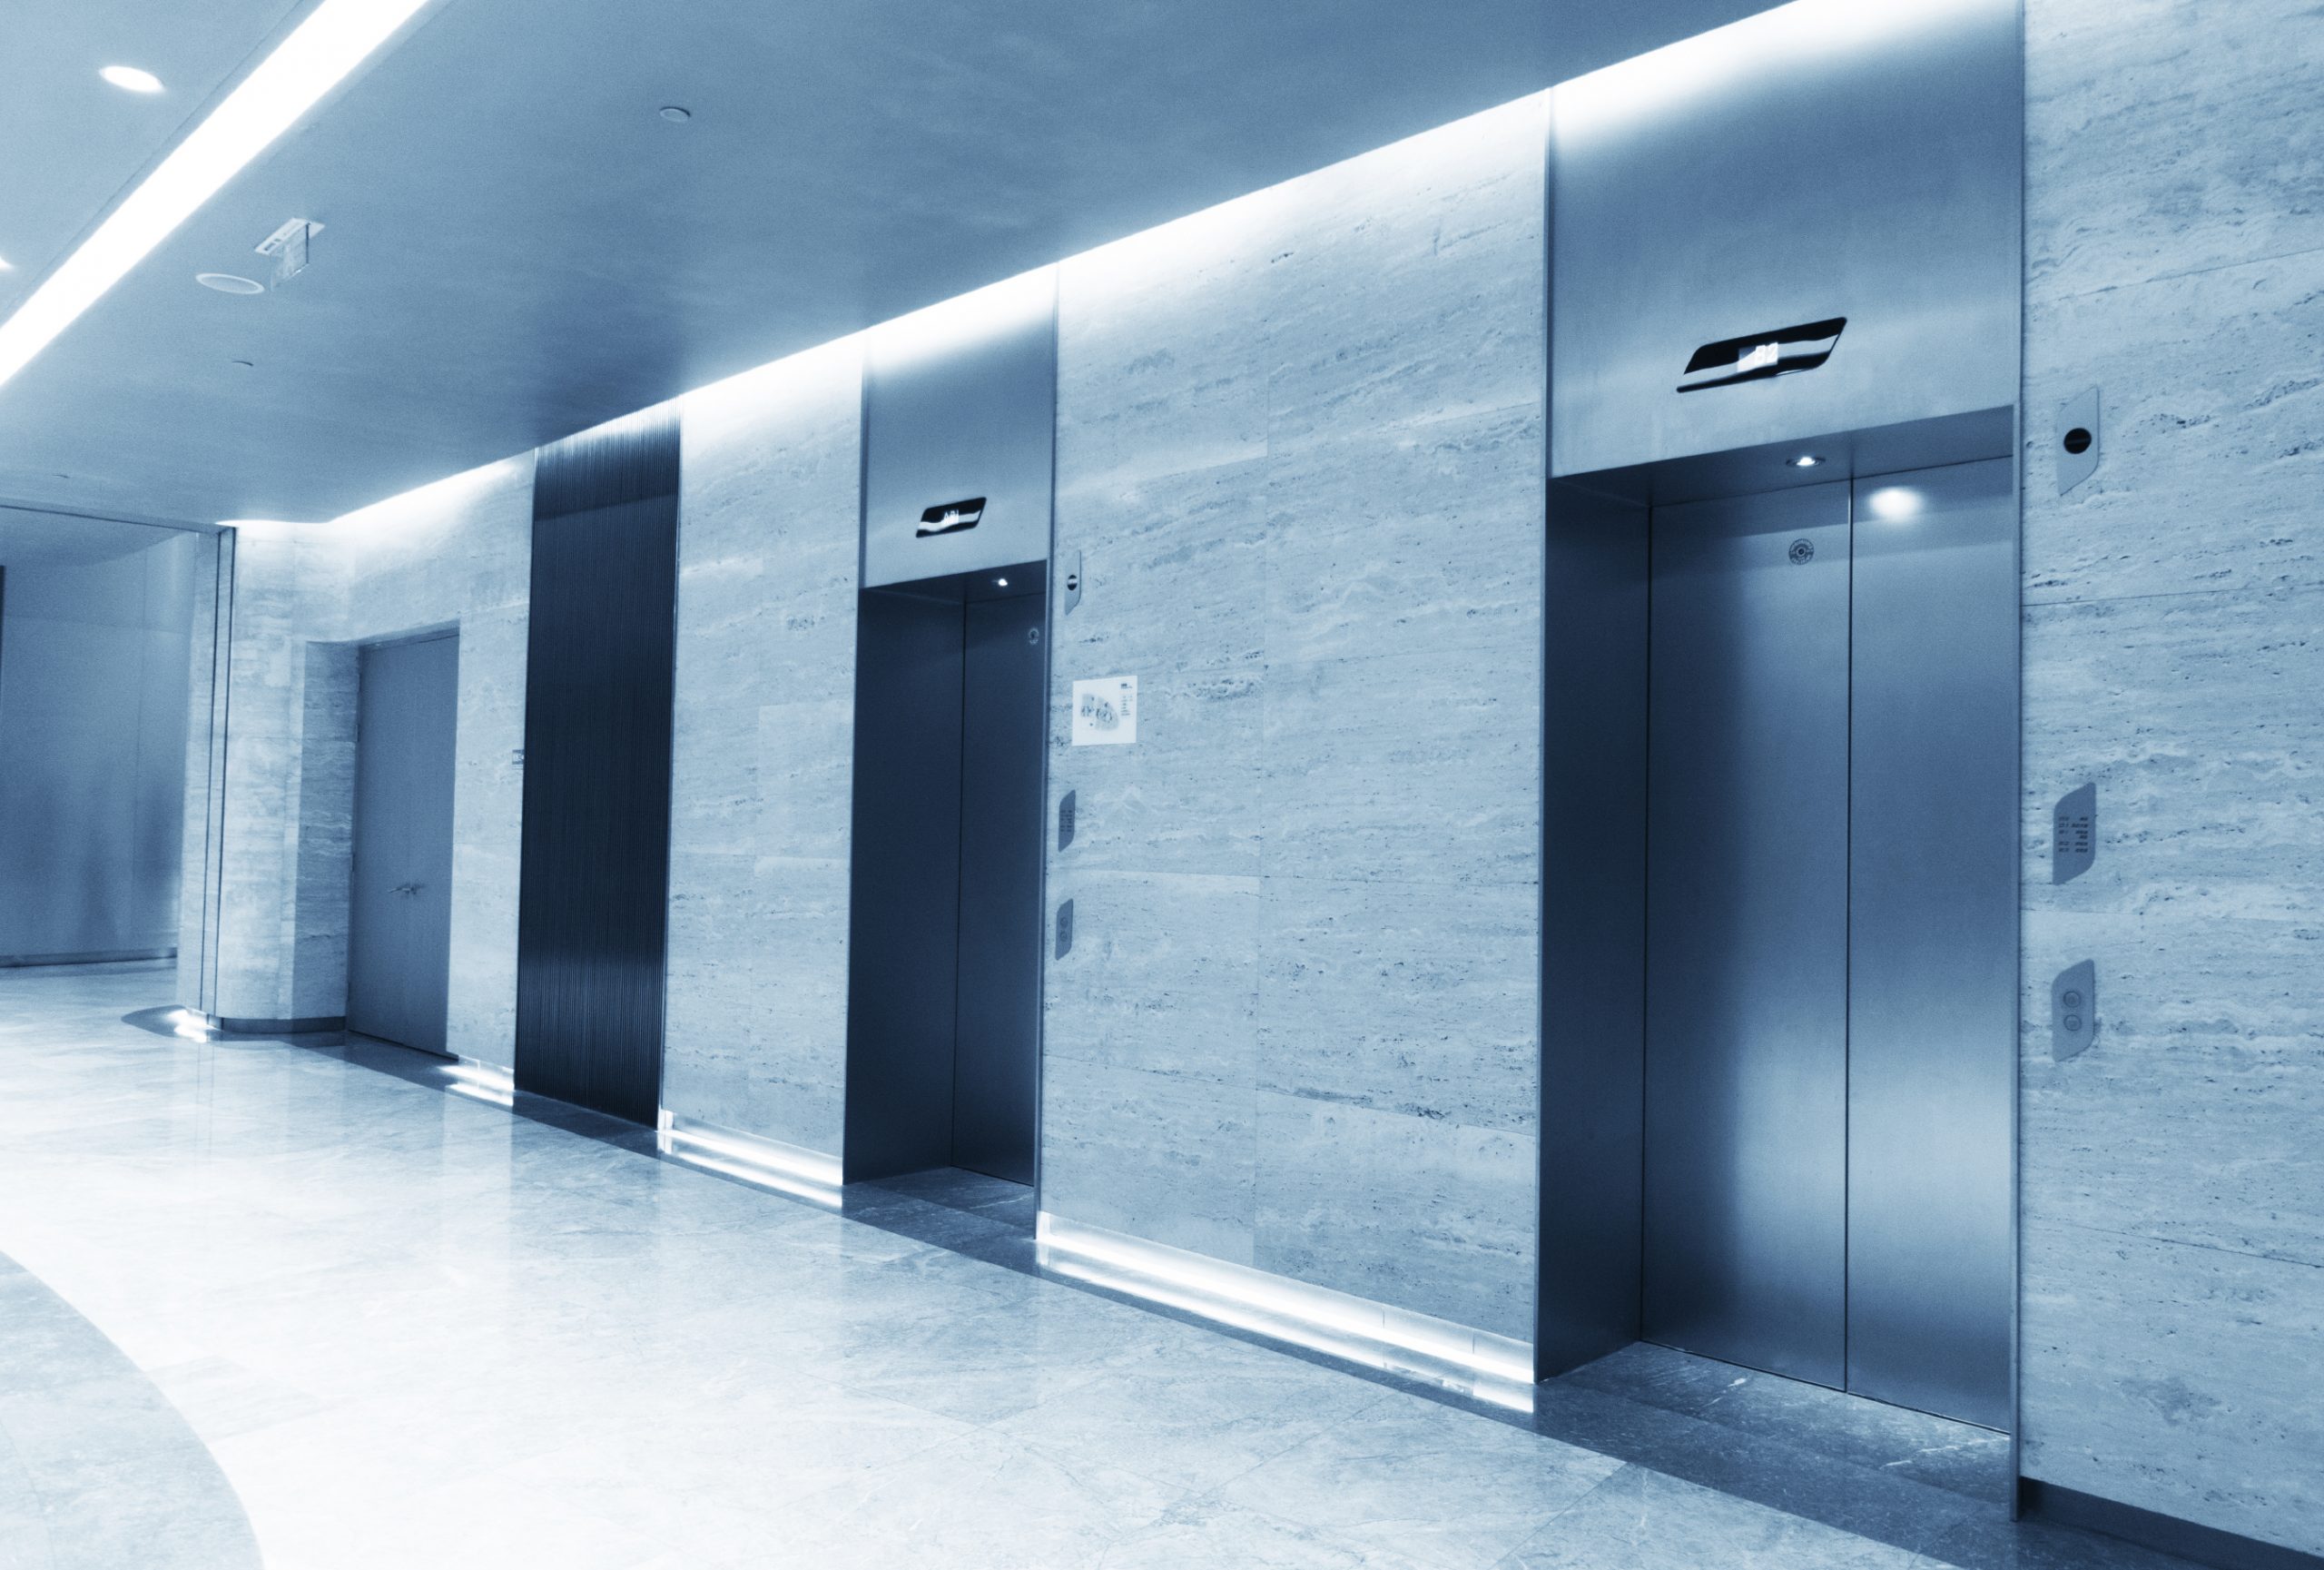 Global Elevators Market – Global Industry Analysis and Forecast (2018-2026)